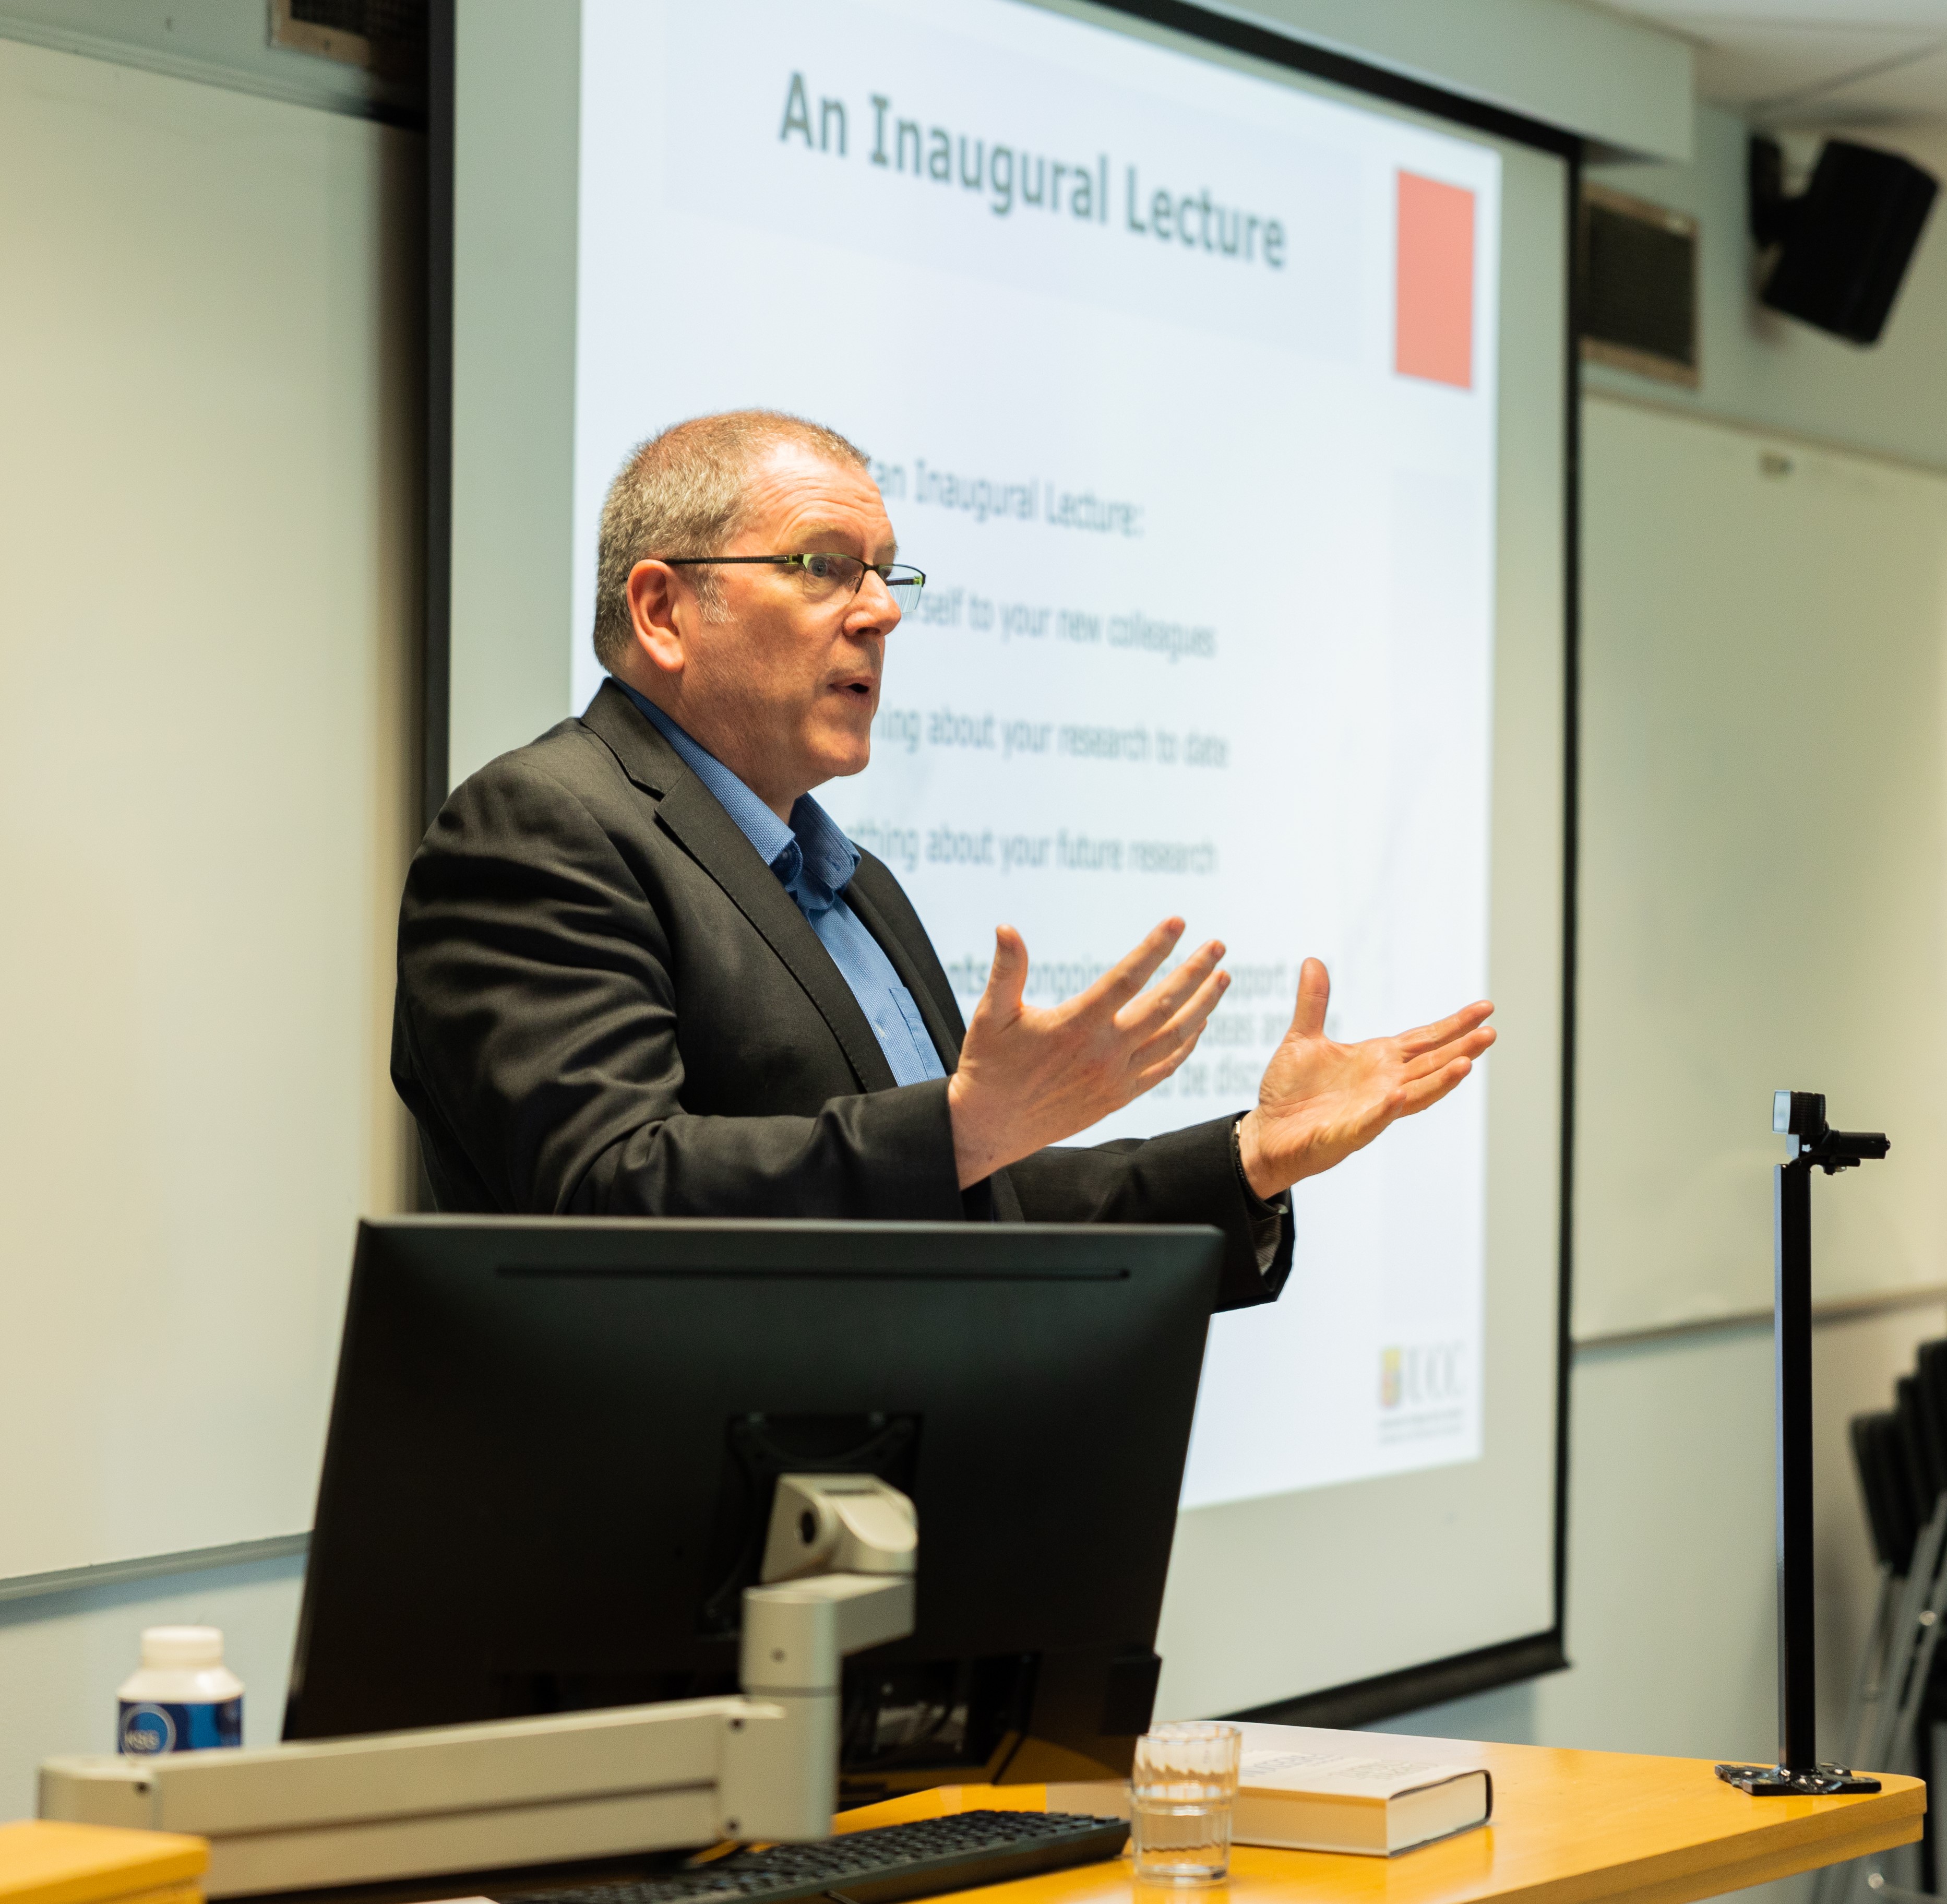 Professor Stewart Smyth delivers his Inaugural Lecture in the College